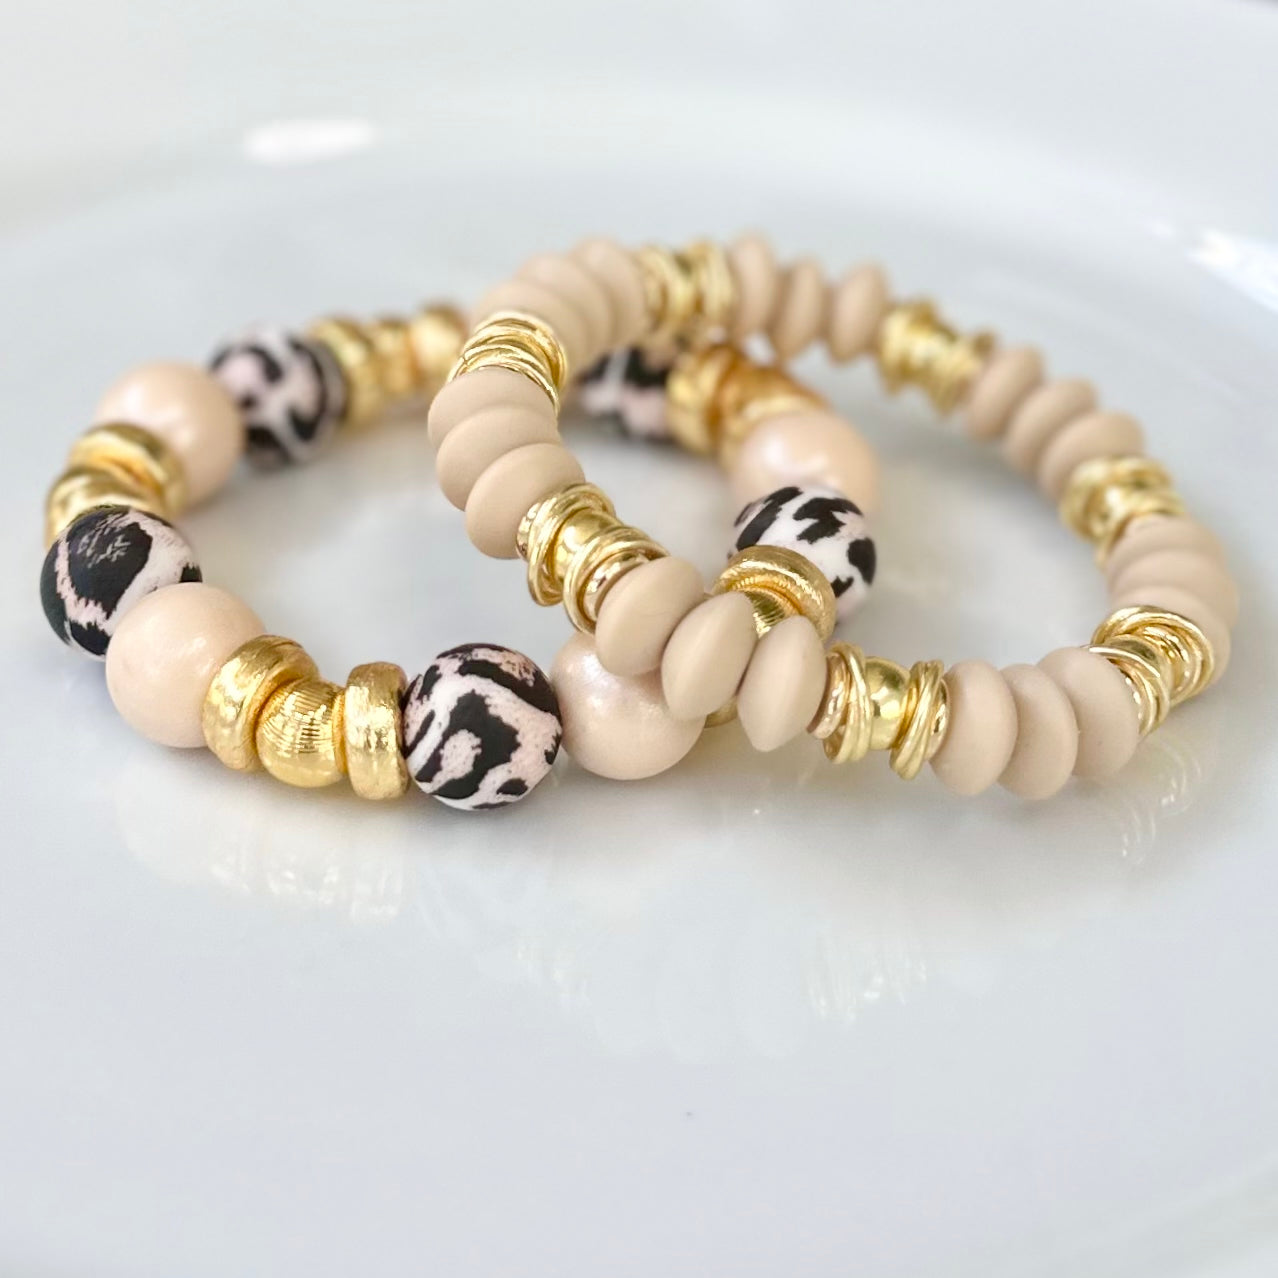 NEW! TAUPE COIL BRACELET WITH GOLD ACCENTS